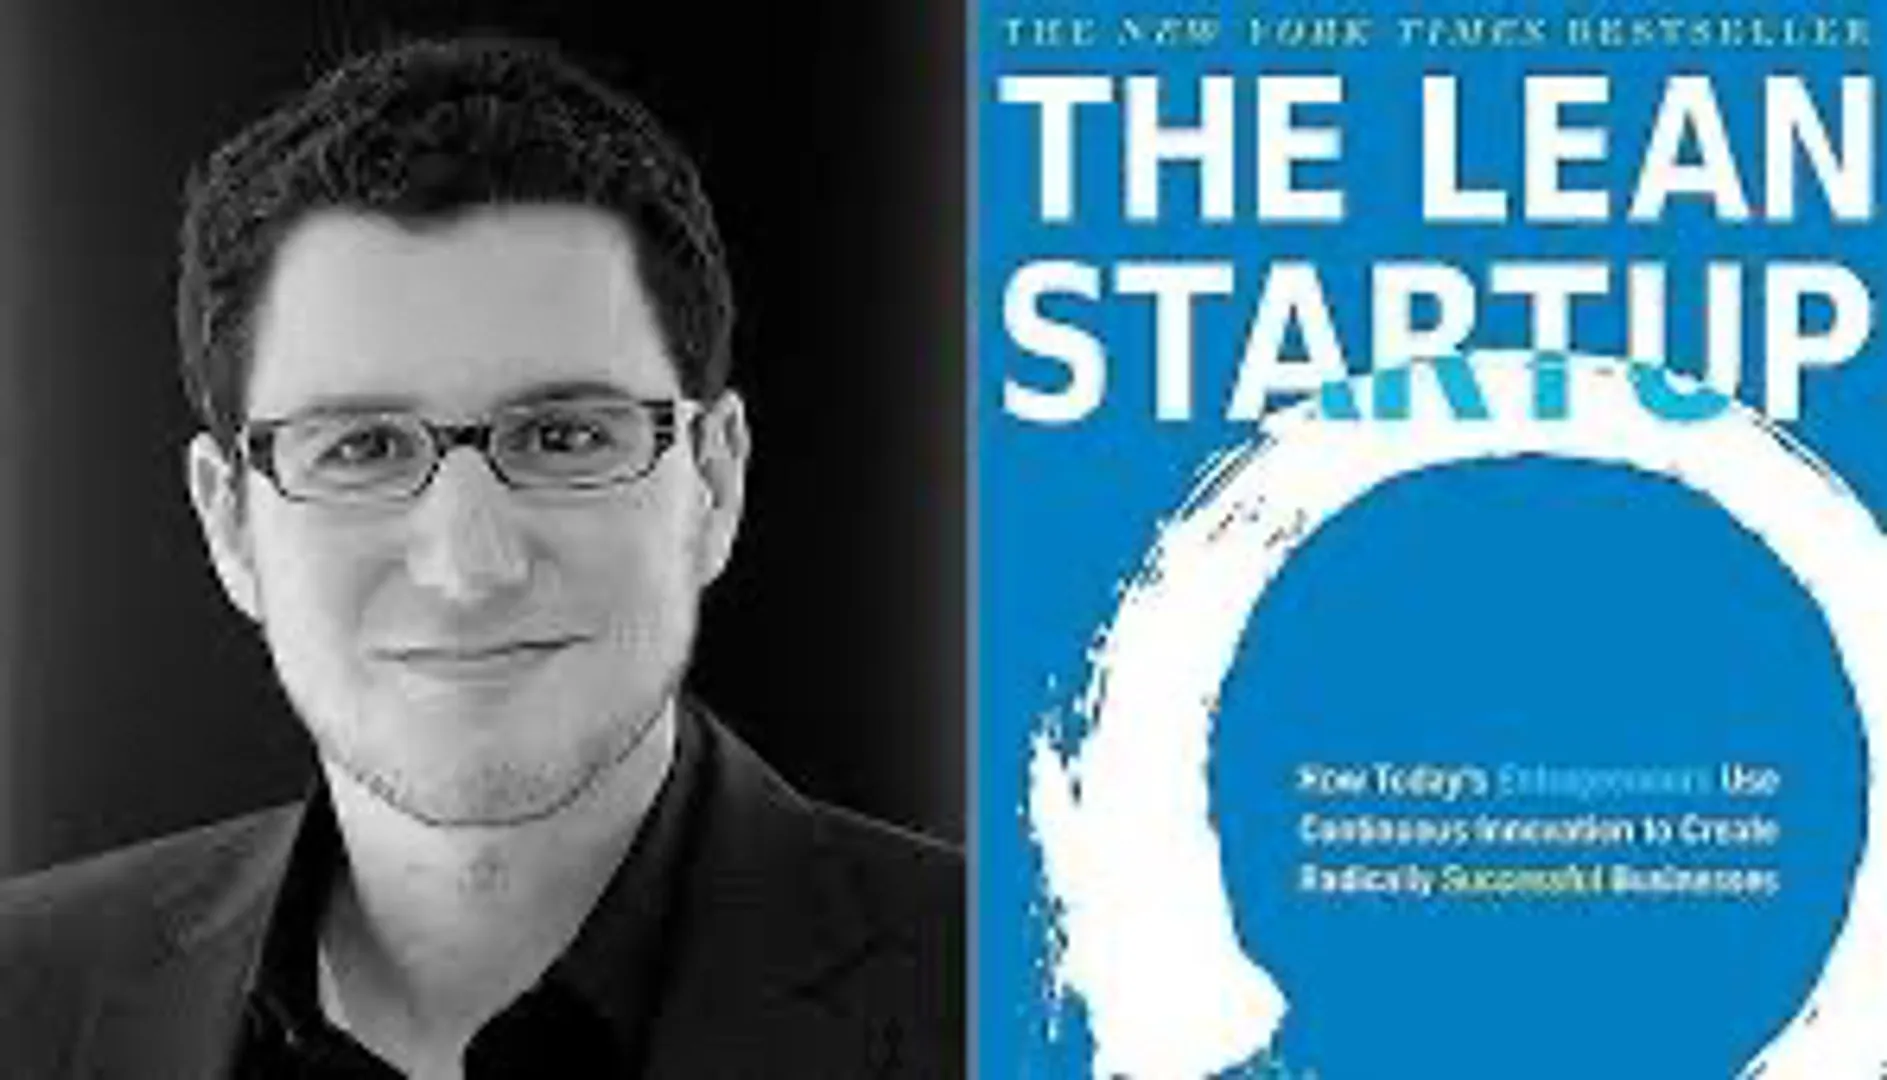 The Lean Startup: Key stats and lesson.

Stats:
- 75% of venture-backed startups fail.
- 74% fail due to building products nobody wants.
- Lean Startup saves 27% of time and reduces costs by 30%.
- Companies using Lean Startup increase their chance of meeting goals by 50%.

Lesson: Focus on customer needs and iterate quickly for business success.